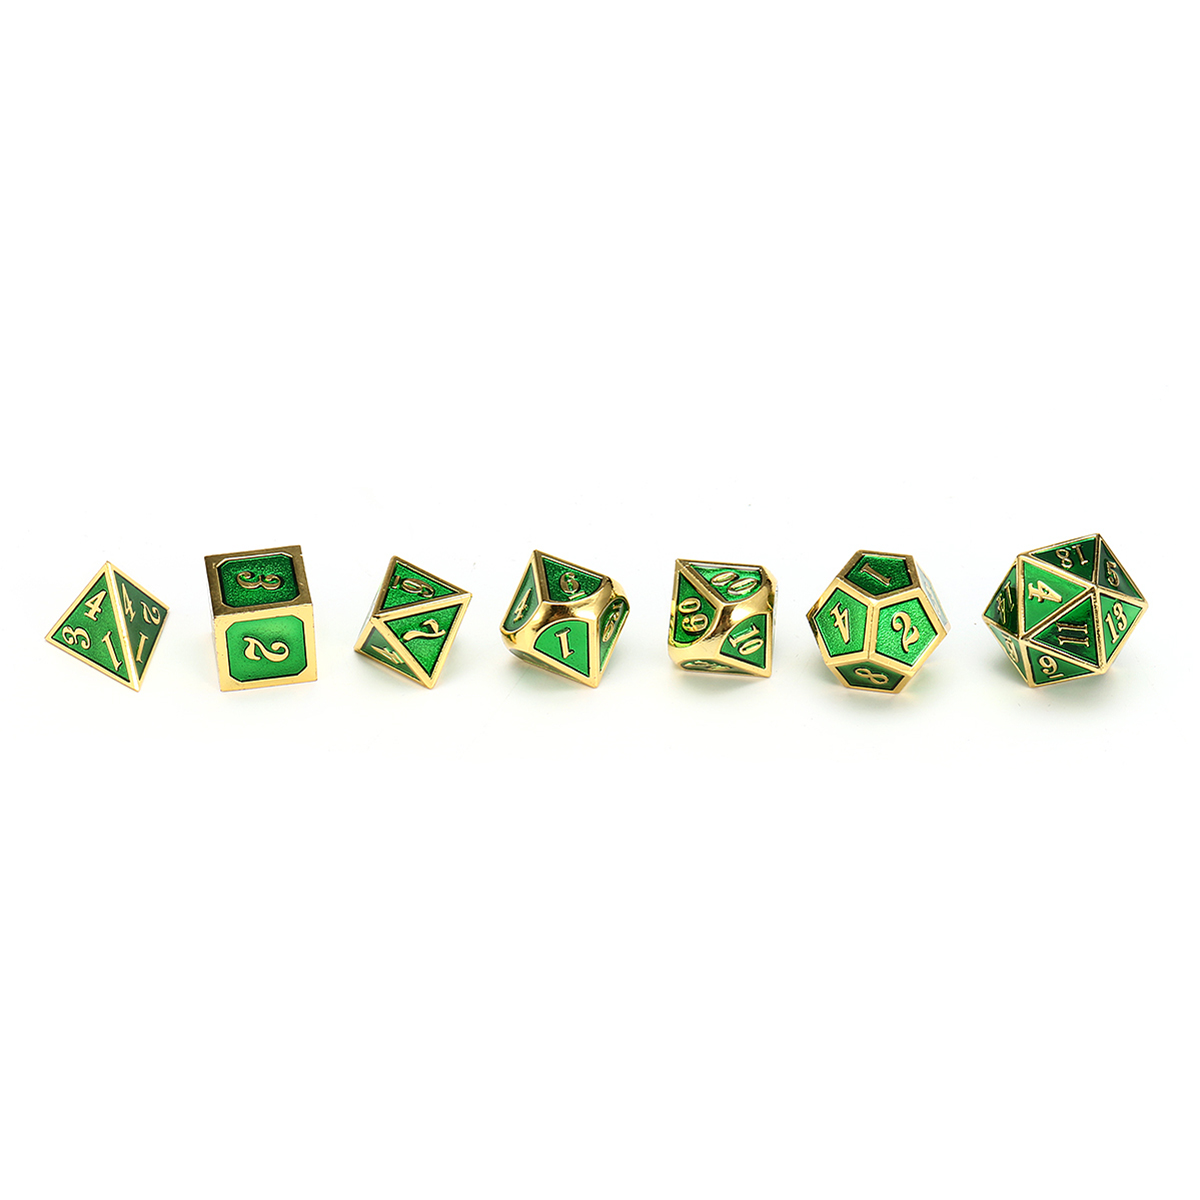 7pcs-Zinc-Alloy-Multisided-Dices-Set-Enamel-Embossed-Heavy-Metal-Polyhedral-Dice-With-Bag-1272100-6